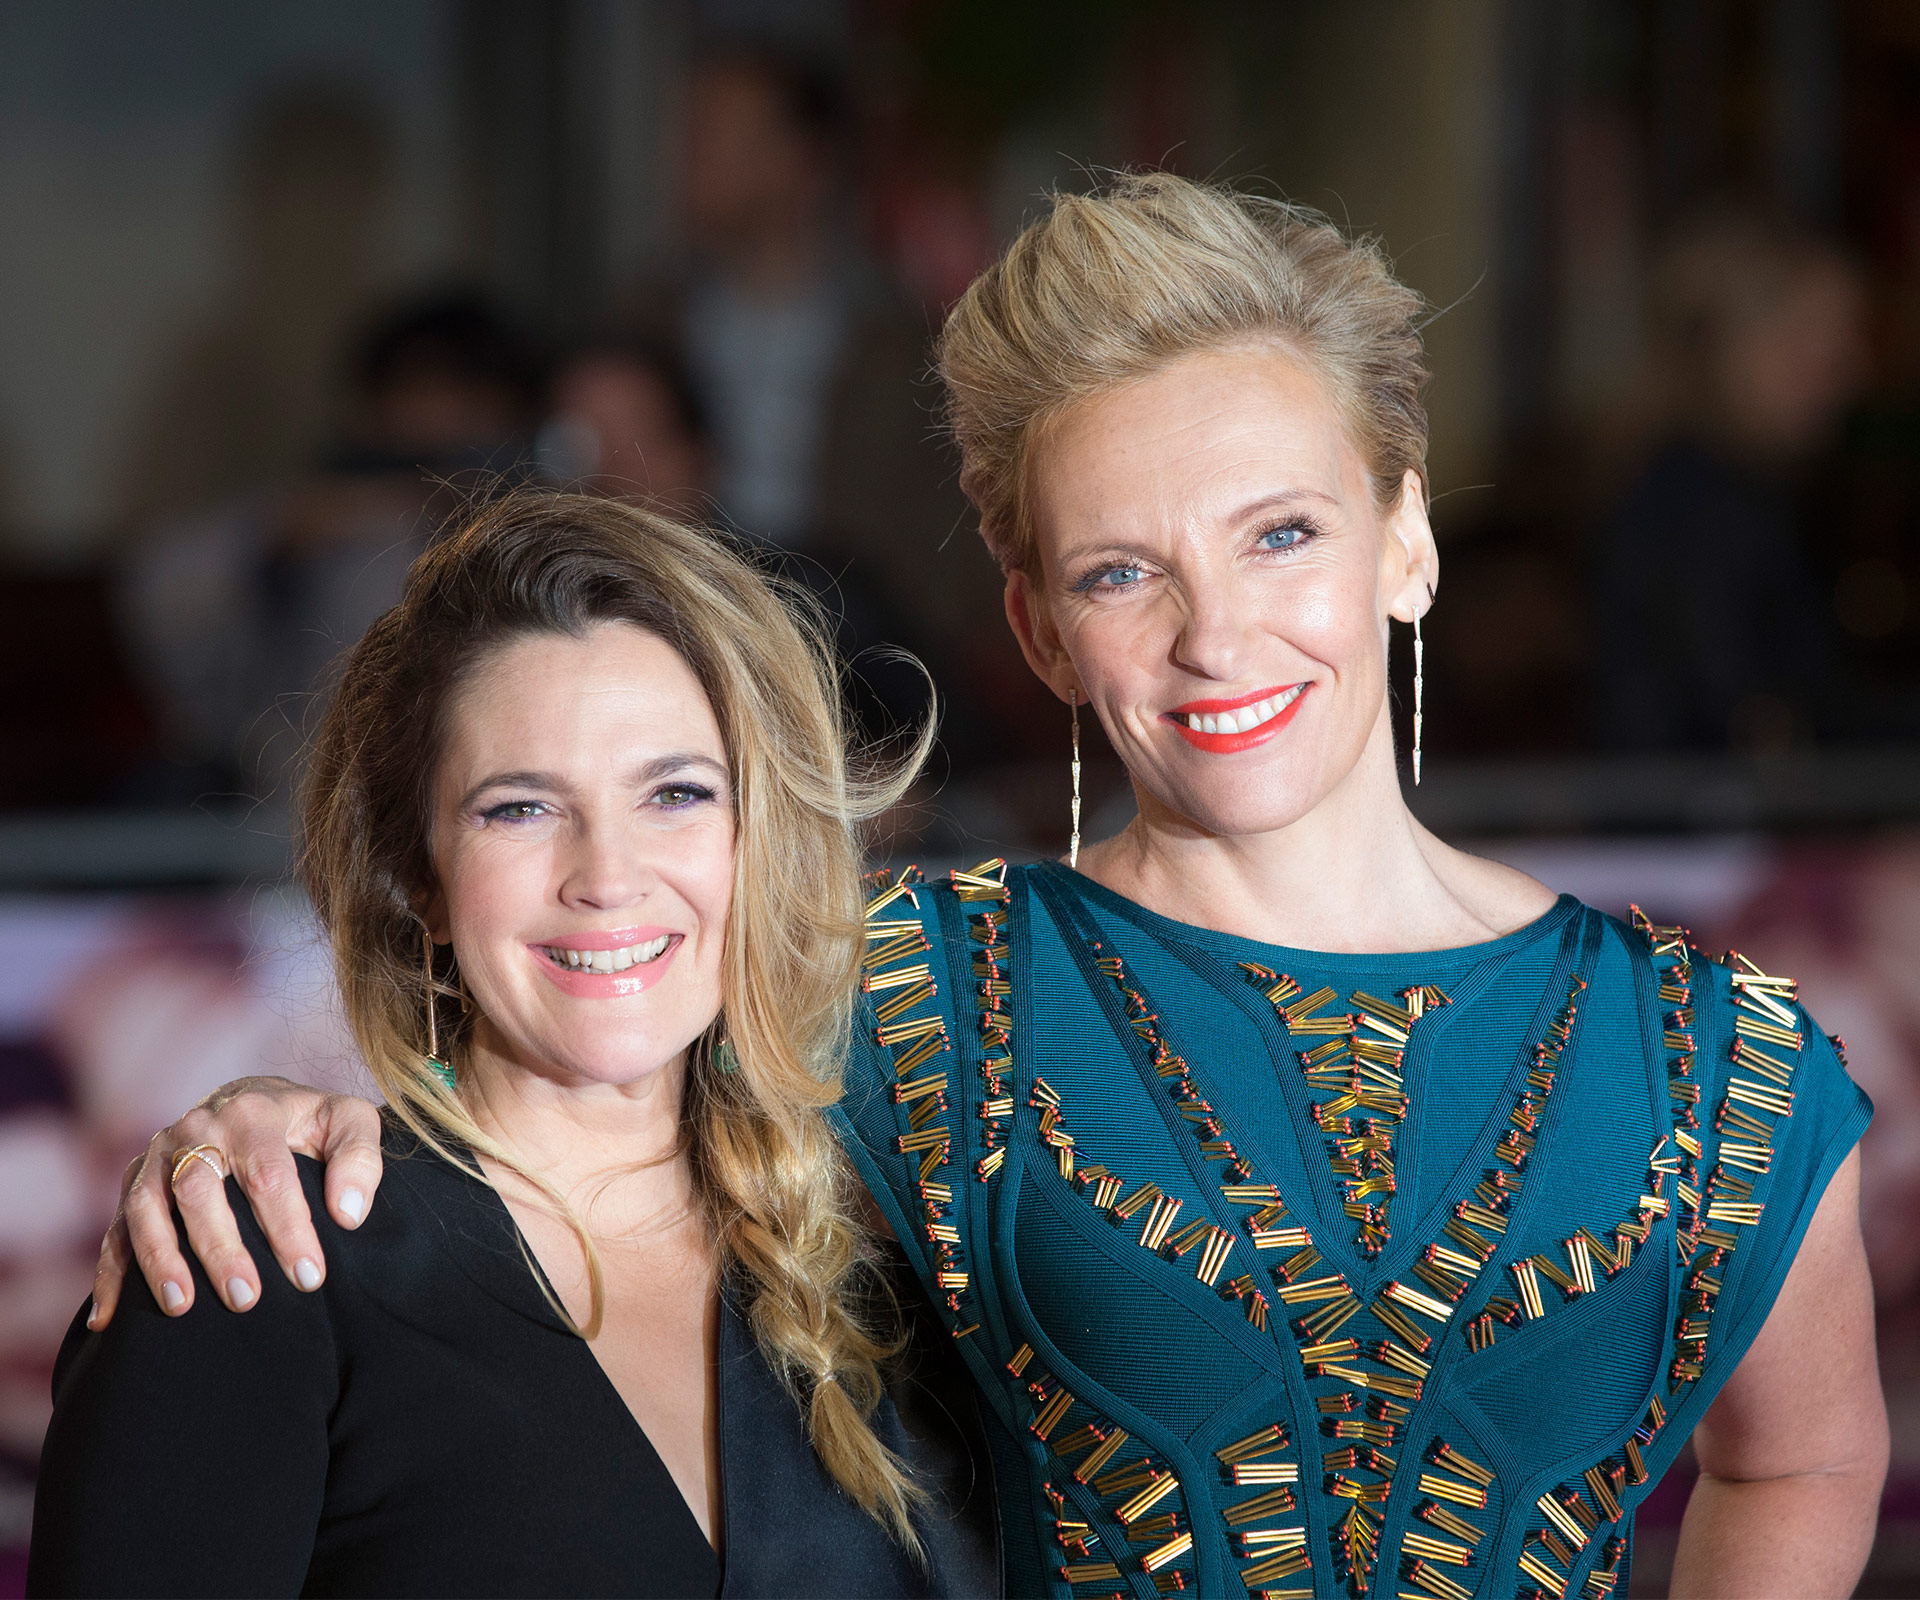 Toni collette and Drew Barrymore